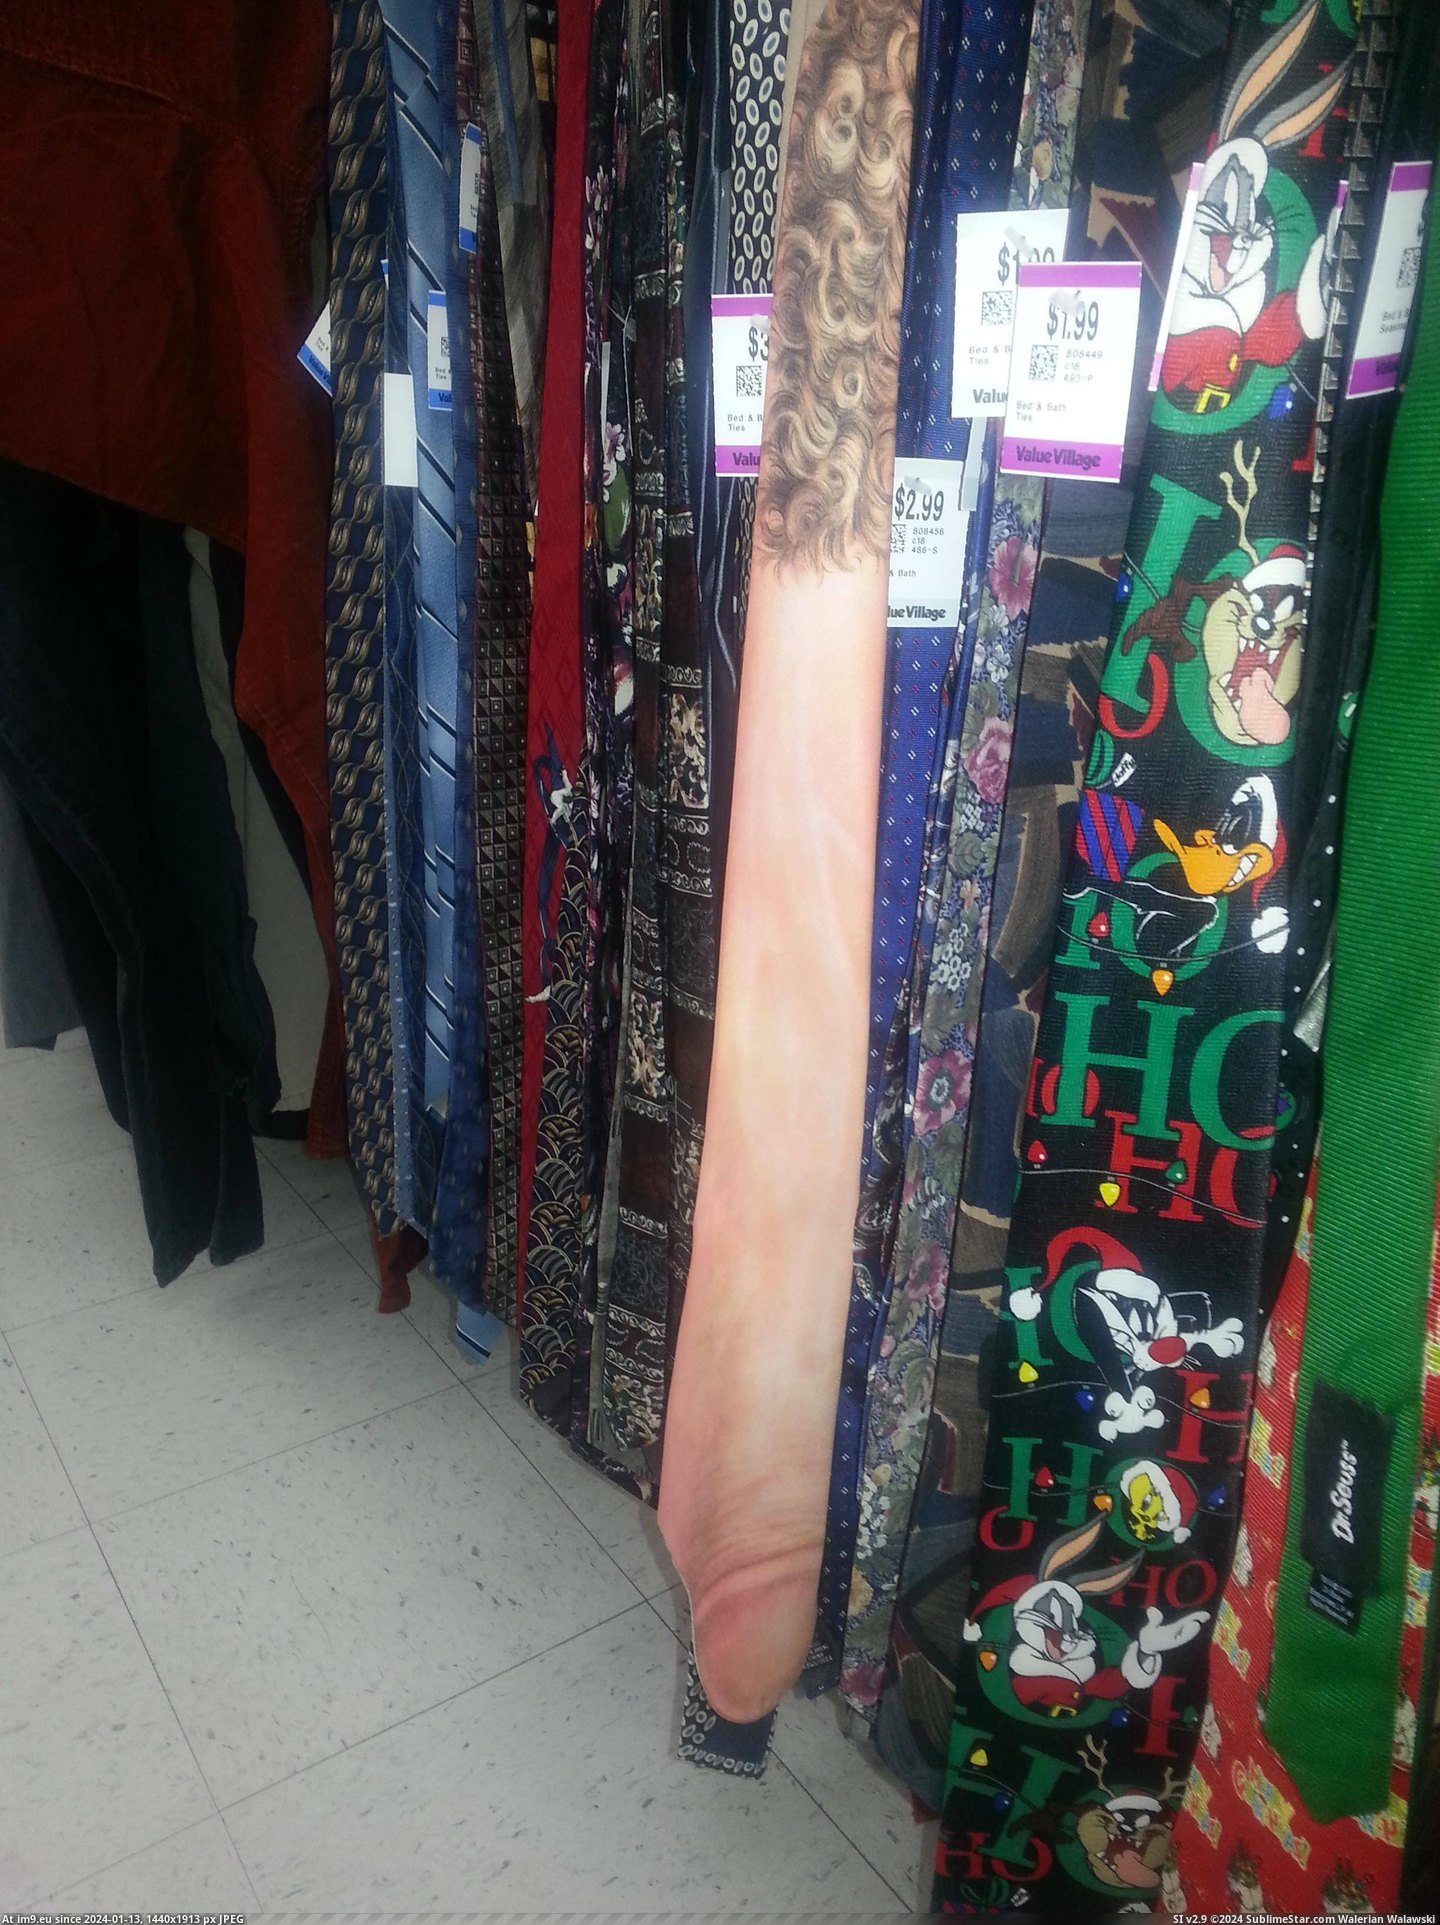 #Funny #Big #Work #Job #Interview #Lighter #Scanning #Color #Tie #Rack #Loud [Funny] I have a big job interview. I need a tie that is lighter in color...not too loud...*scanning rack* 'oh, that would work. Pic. (Image of album My r/FUNNY favs))